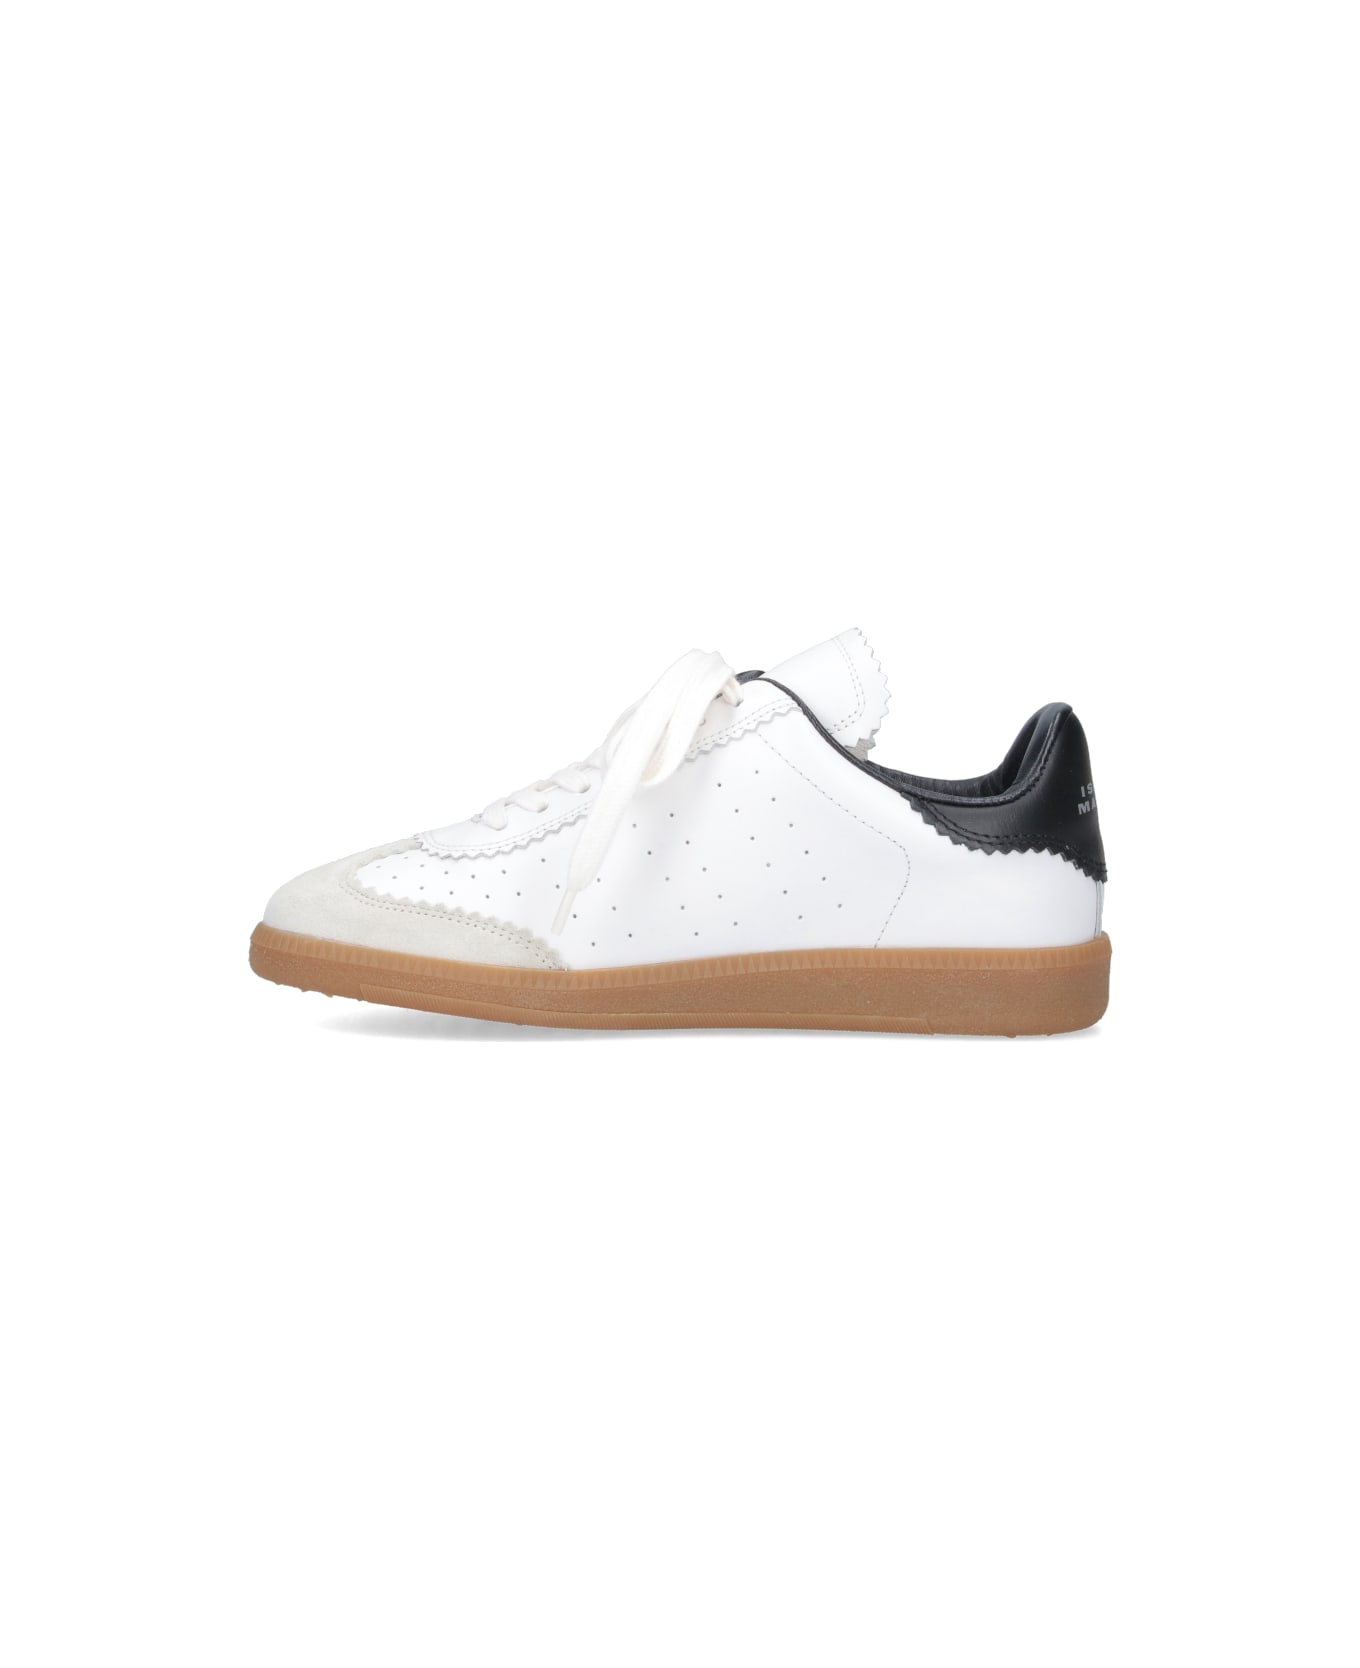 Isabel Marant Bryce Sneakers - Wh White スニーカー